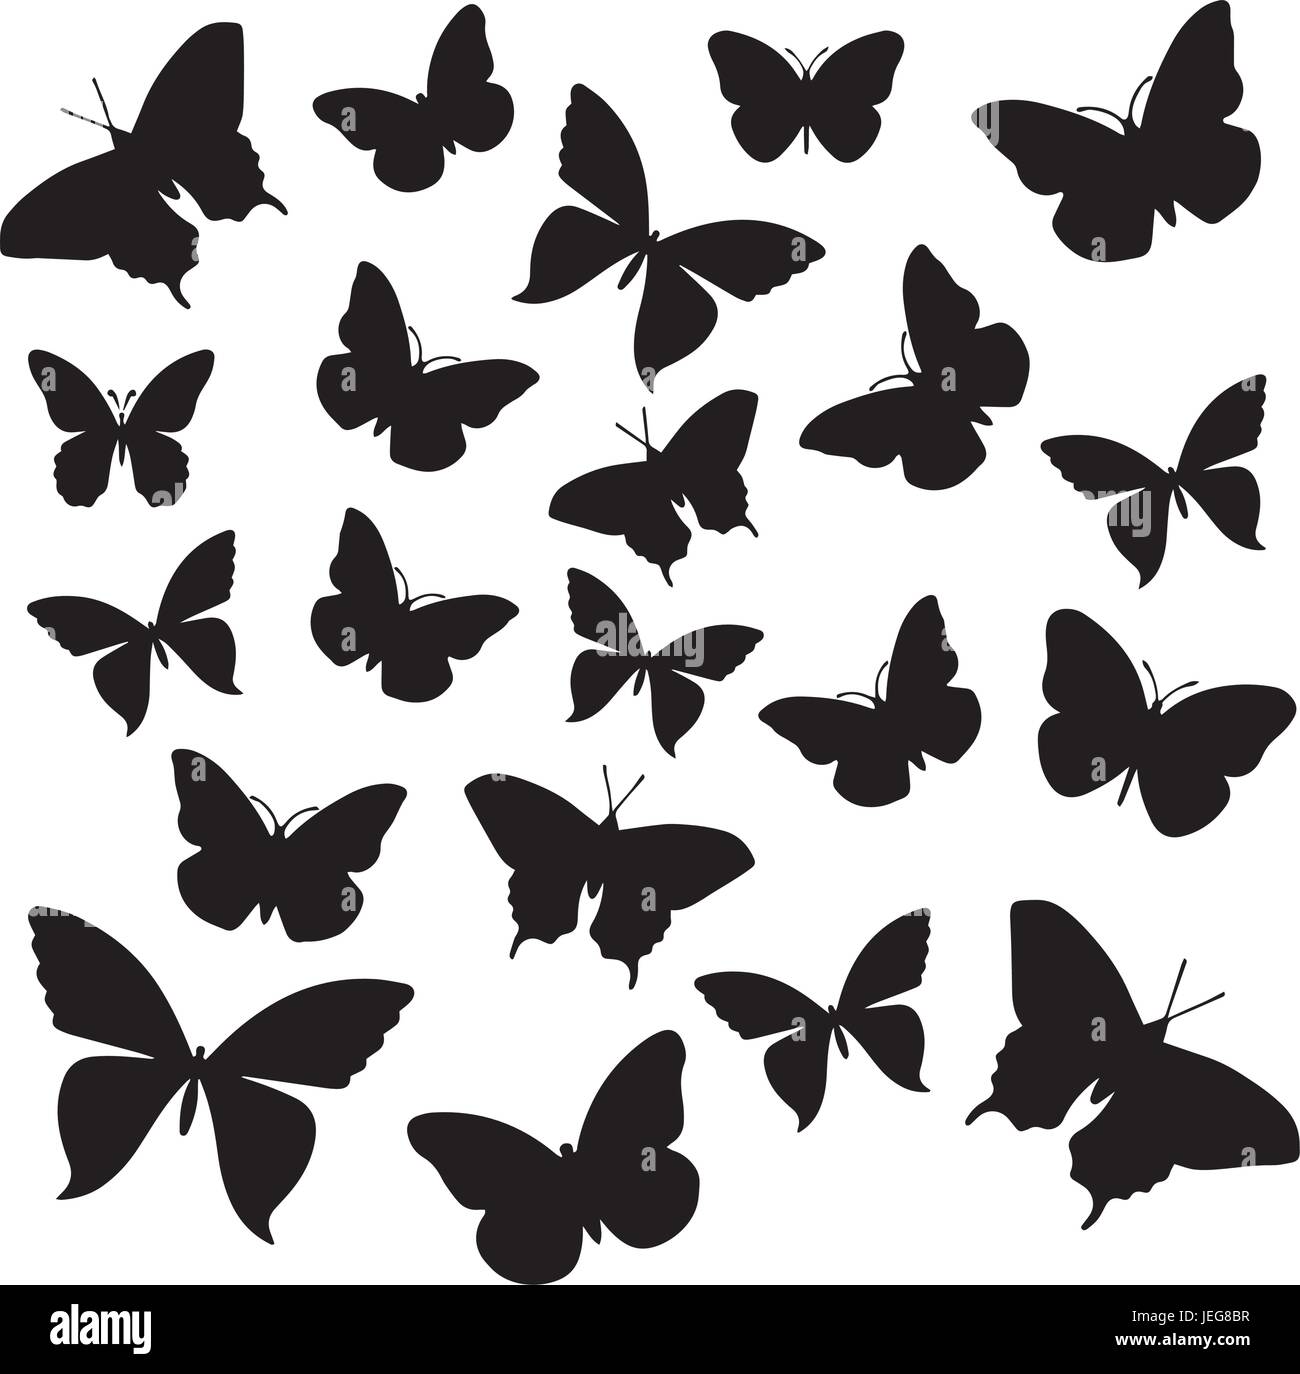 Black and white silhouette of butterflies. Stock Vector